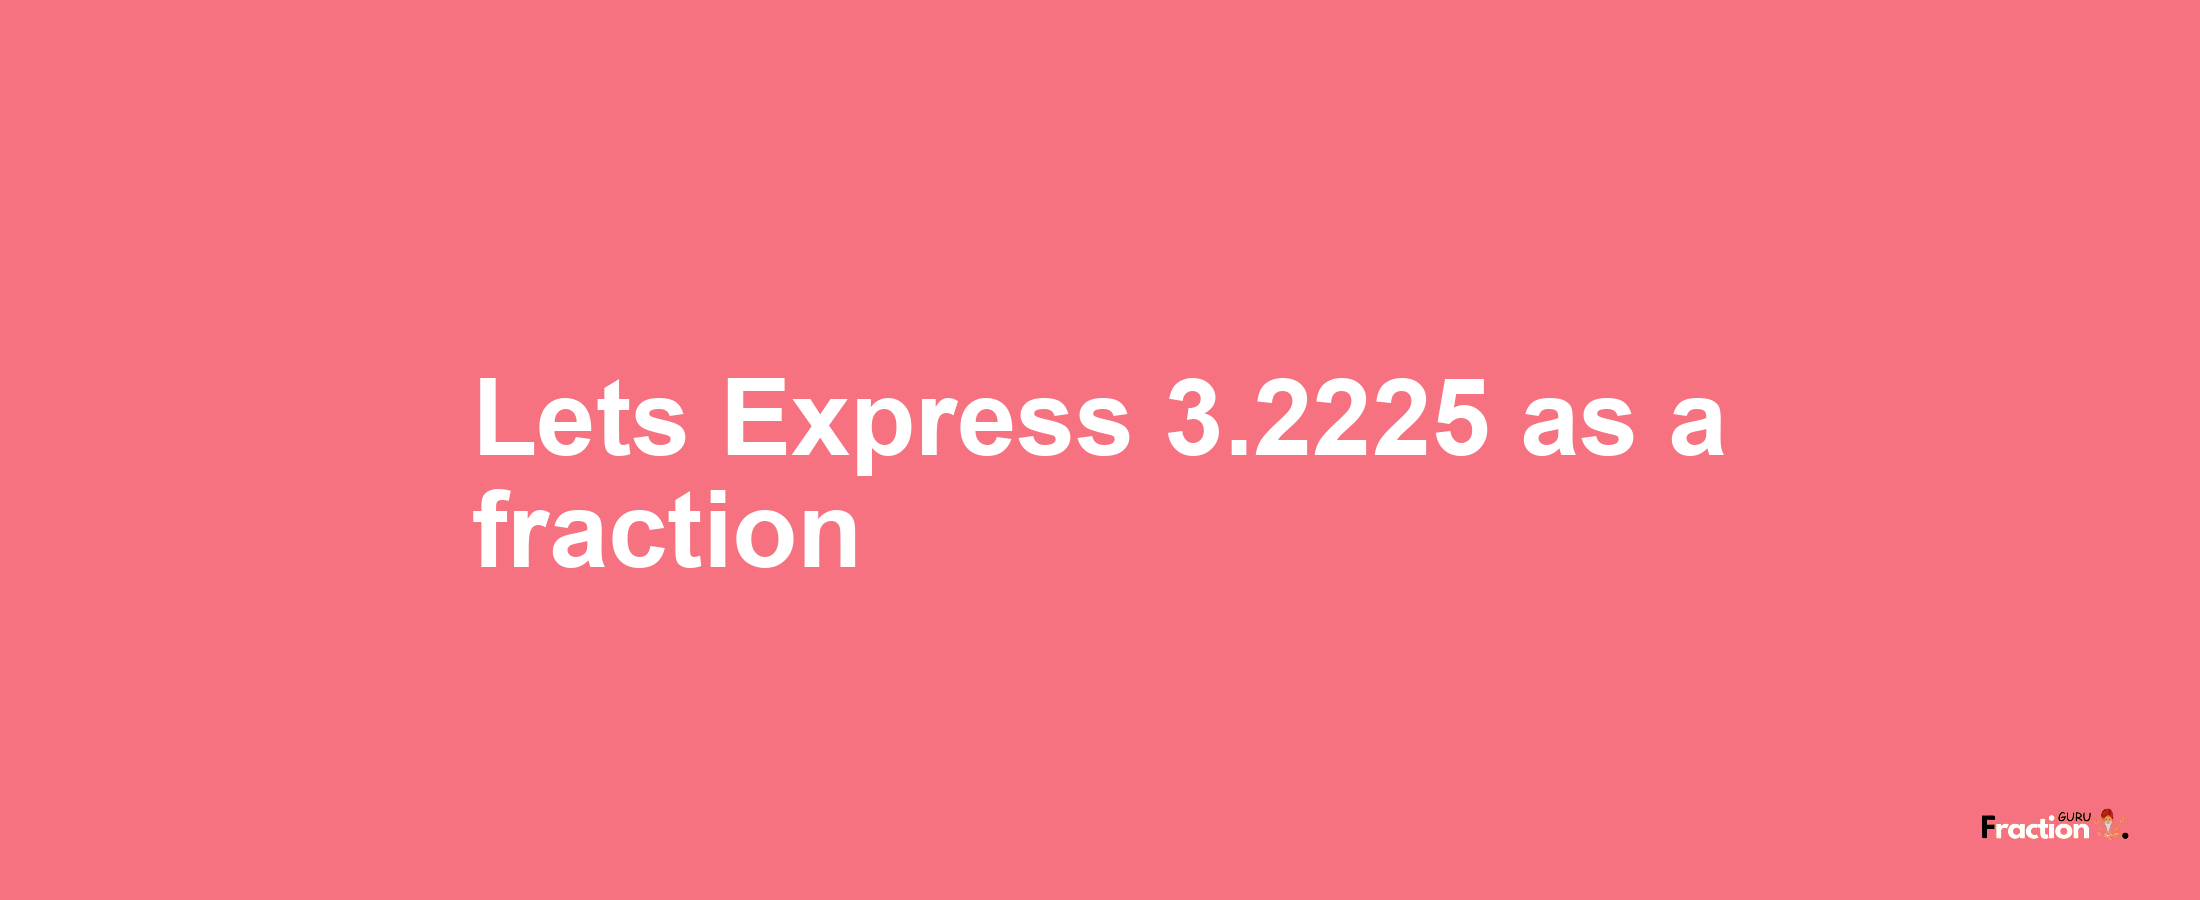 Lets Express 3.2225 as afraction